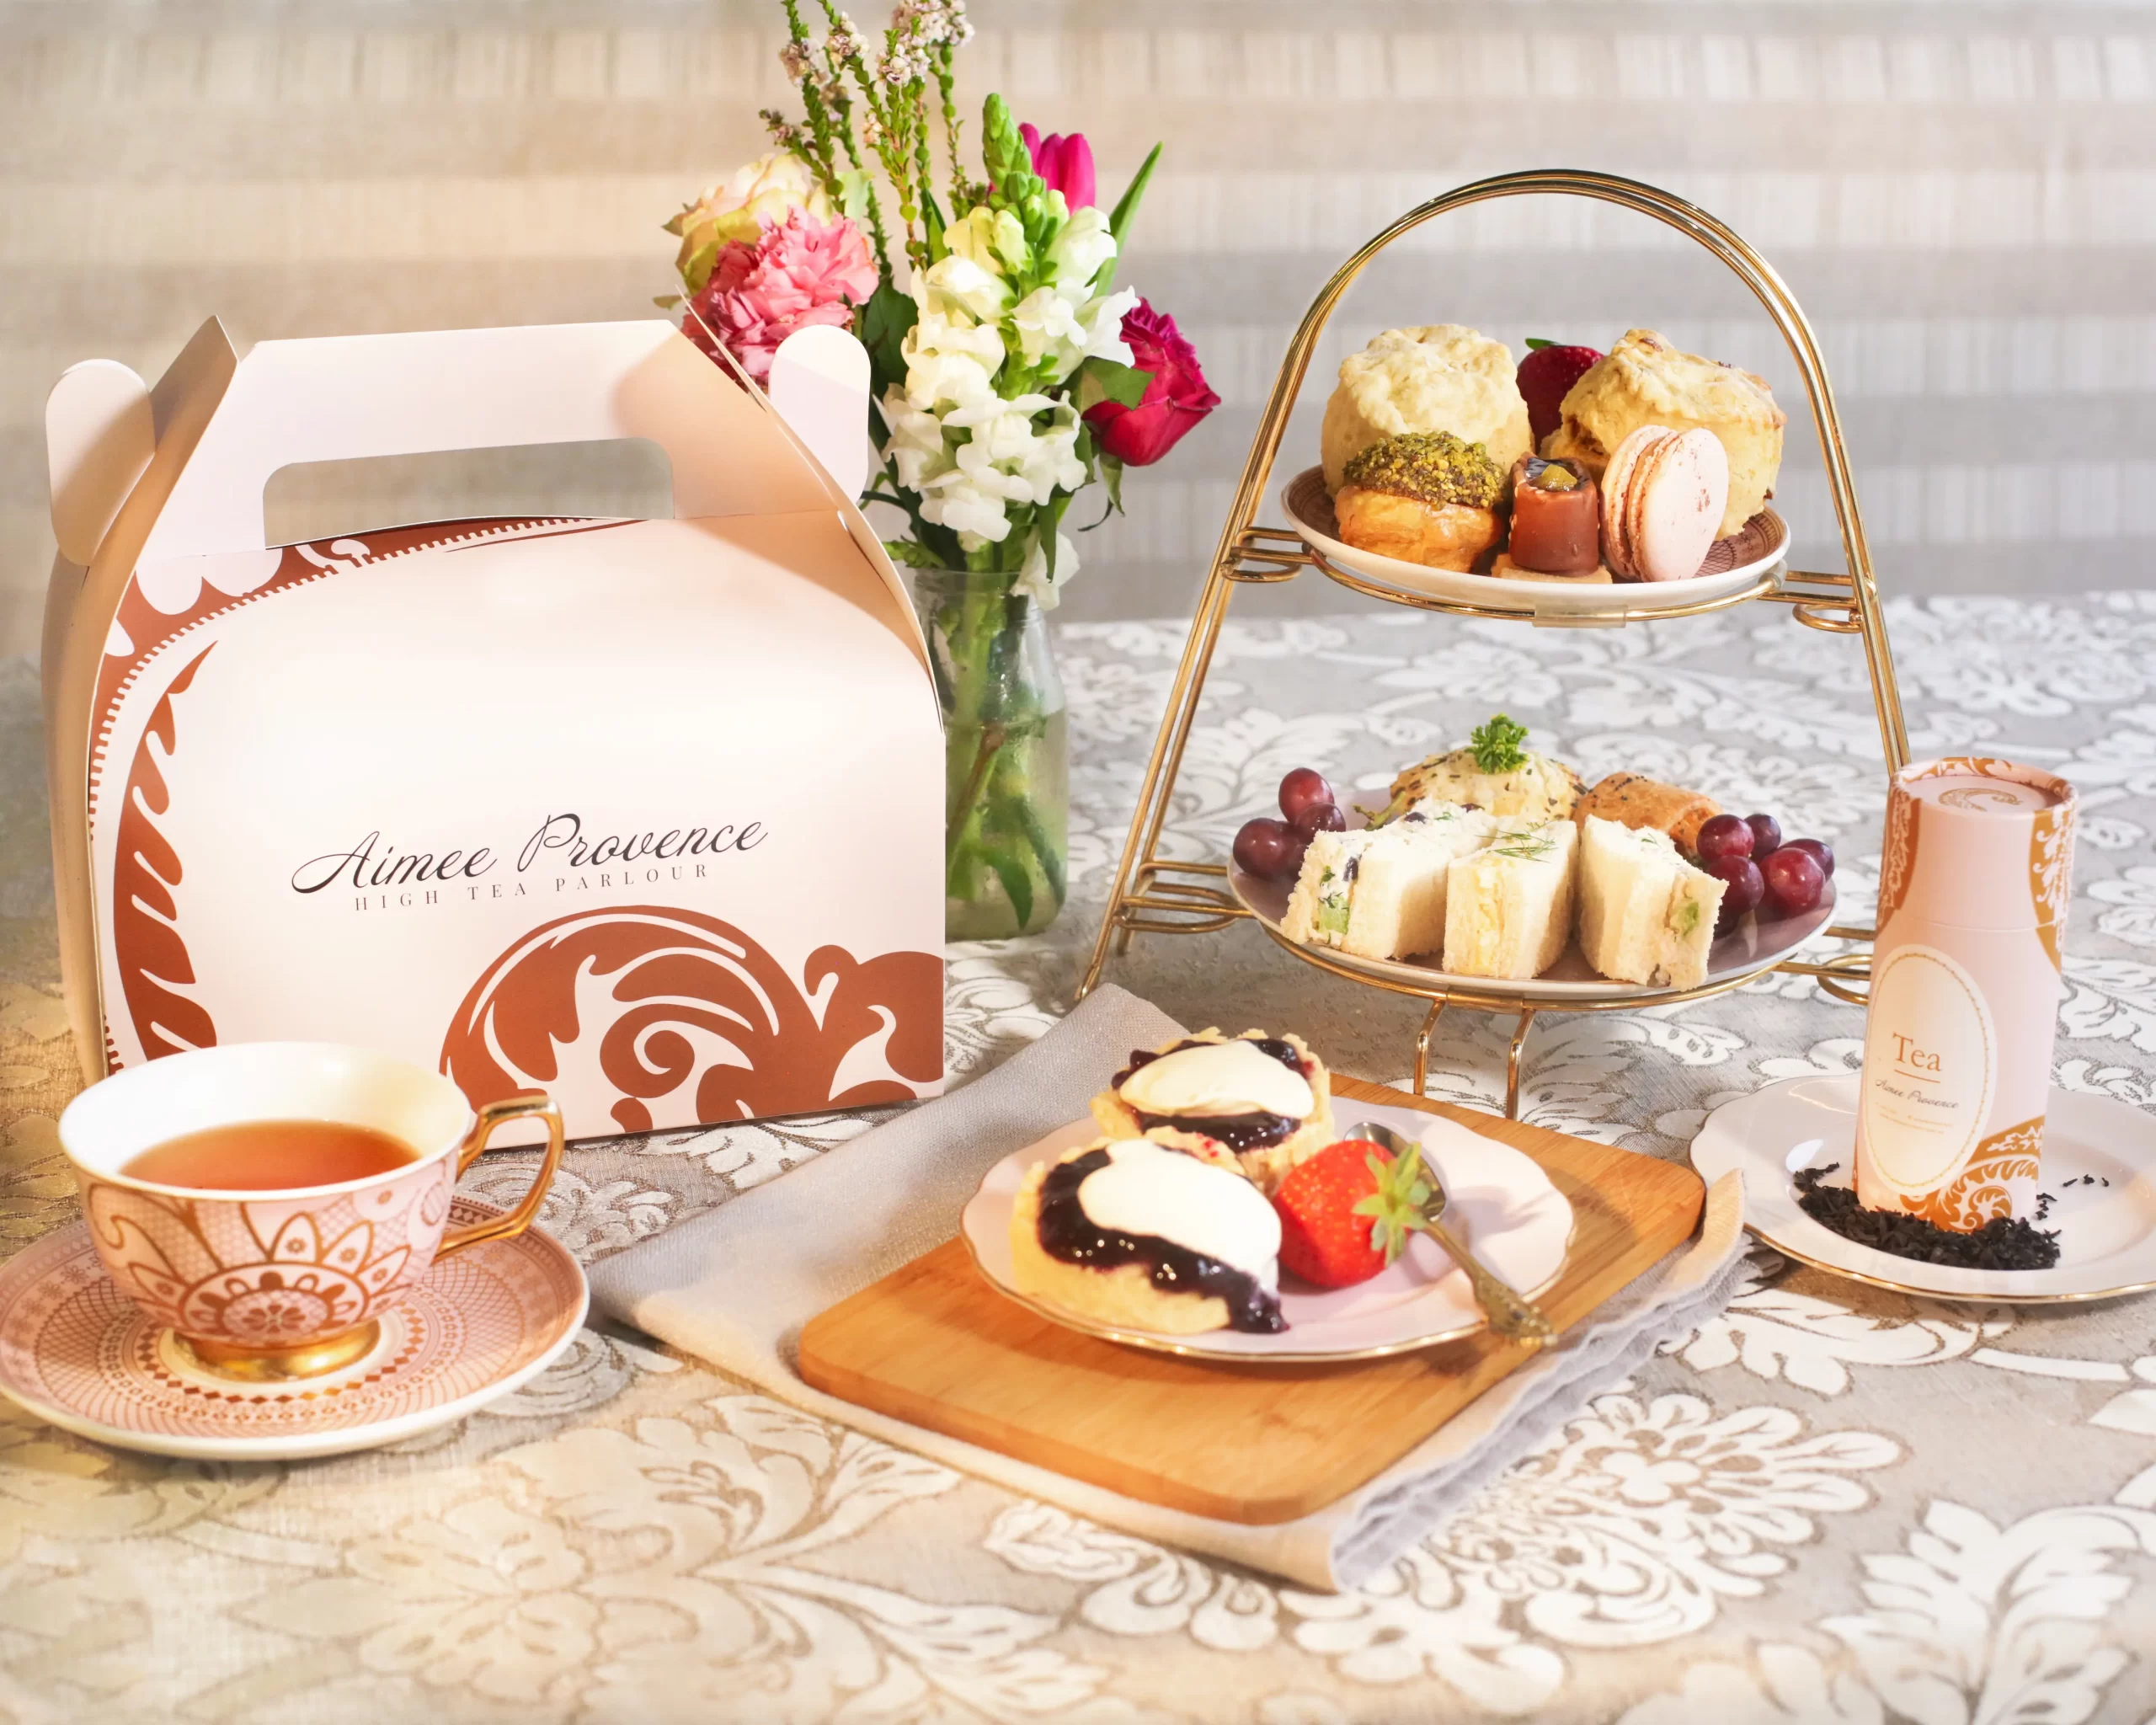 high tea delivery for one person aimee provence buderim